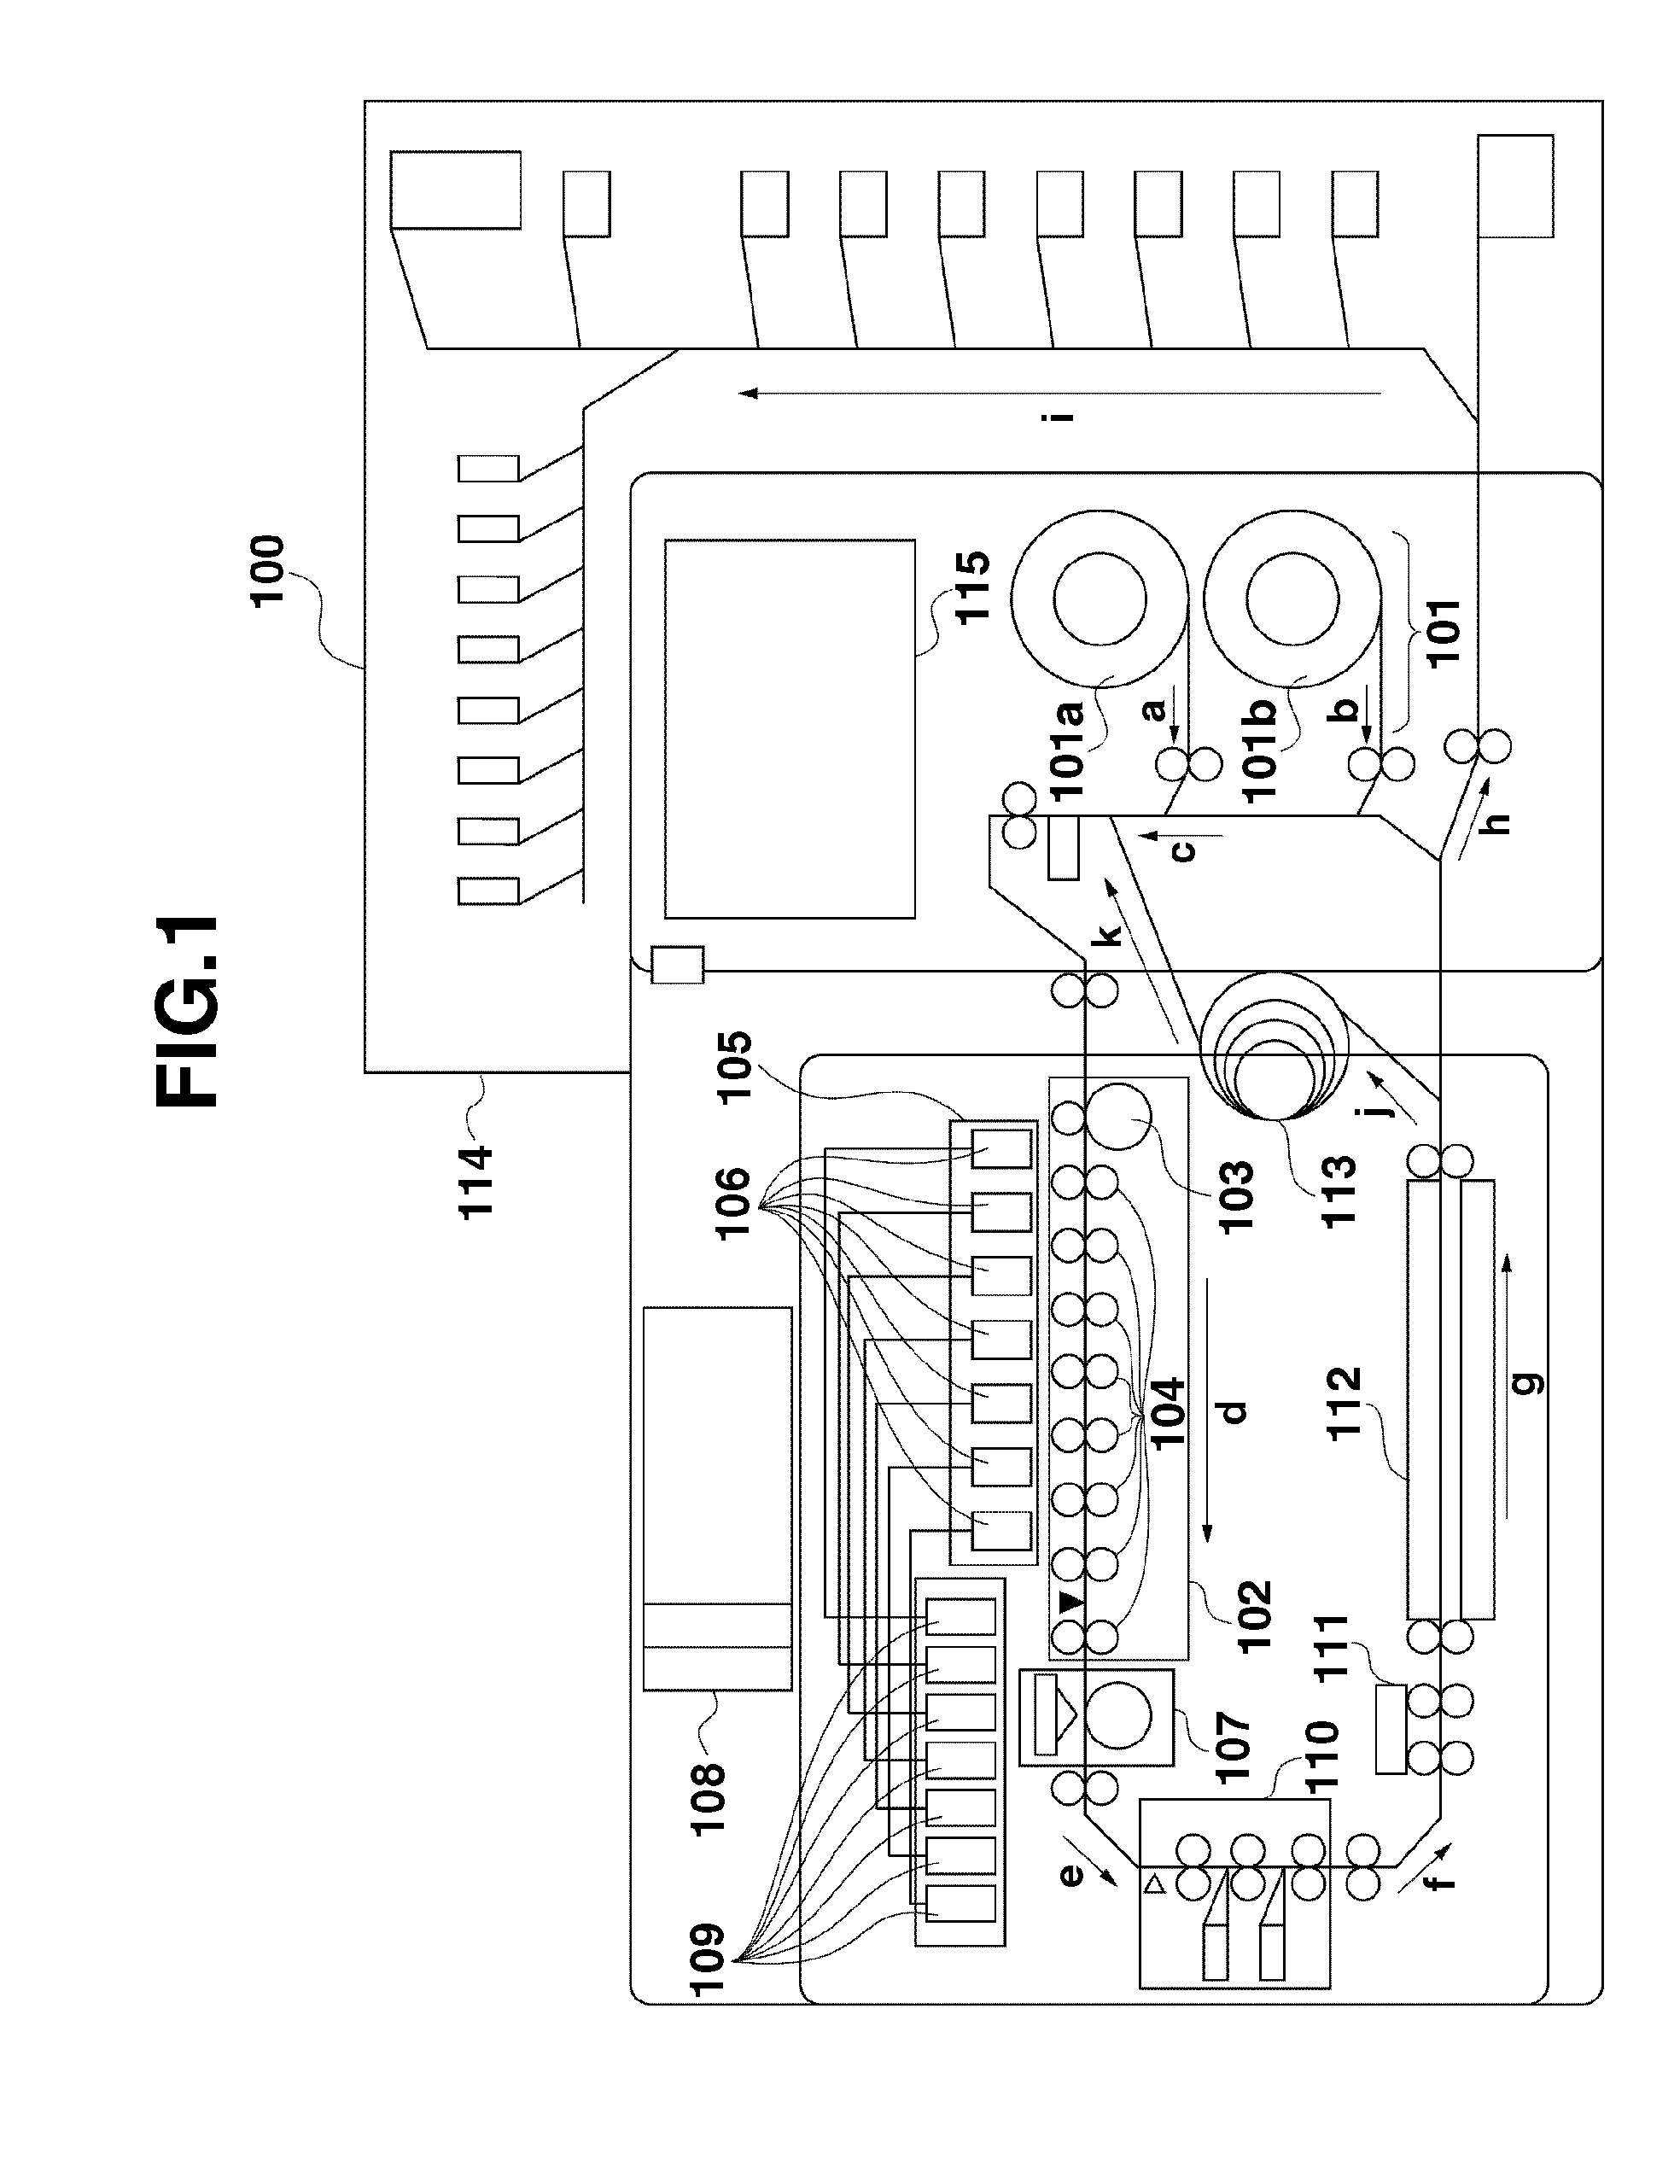 Image processing apparatus and control method or program therefor